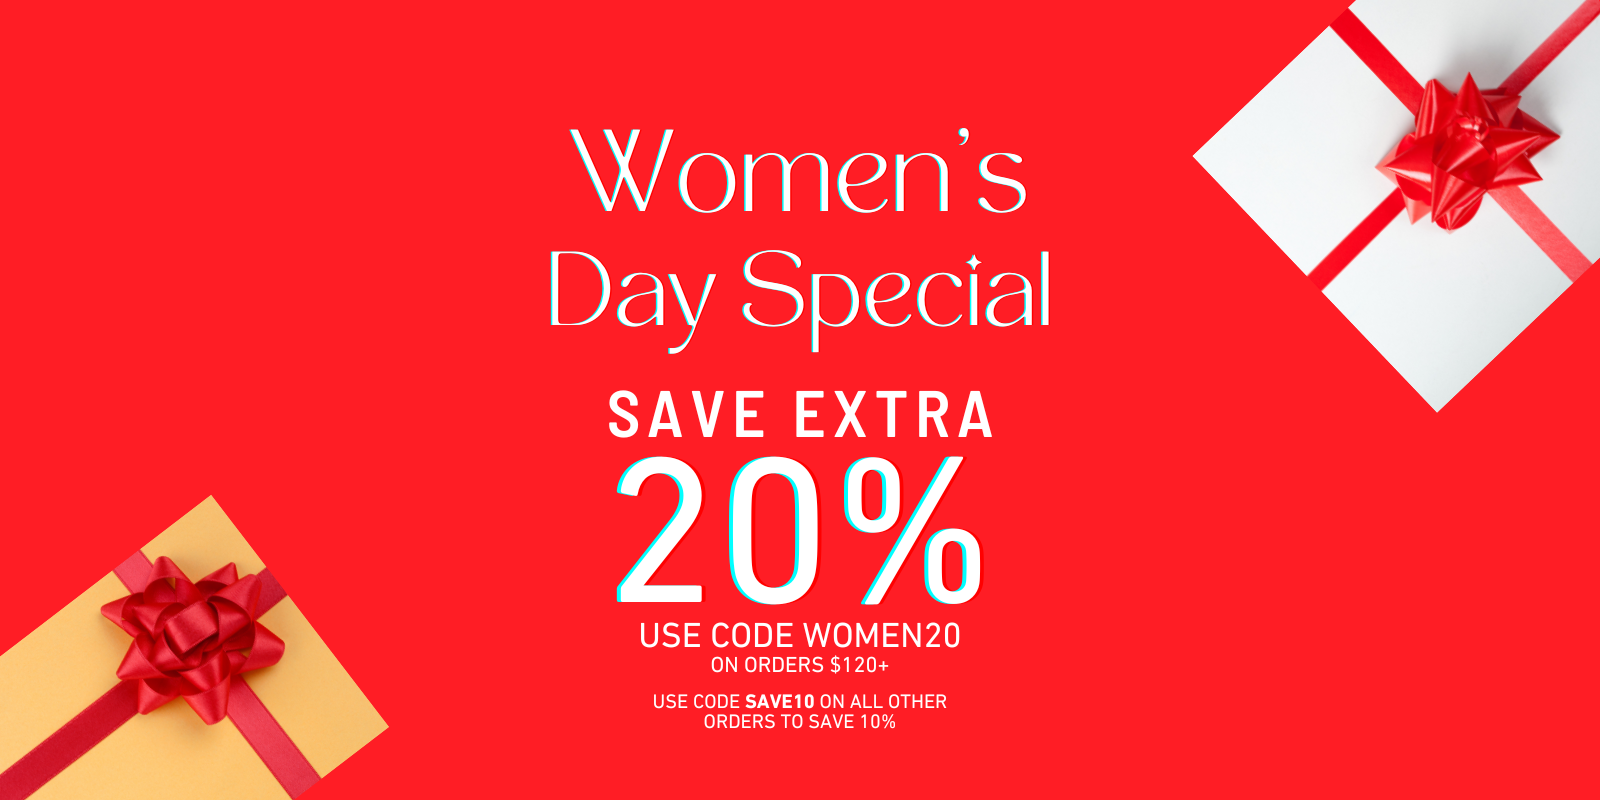 WOMEN'S DAY SPECIAL SAVE EXTRA 20% OFF USE CODE WOMEN20 ON ORDERS $120+, USE CODE SAVE10 ON ALL OTHER ORDERS TO SAVE 10%